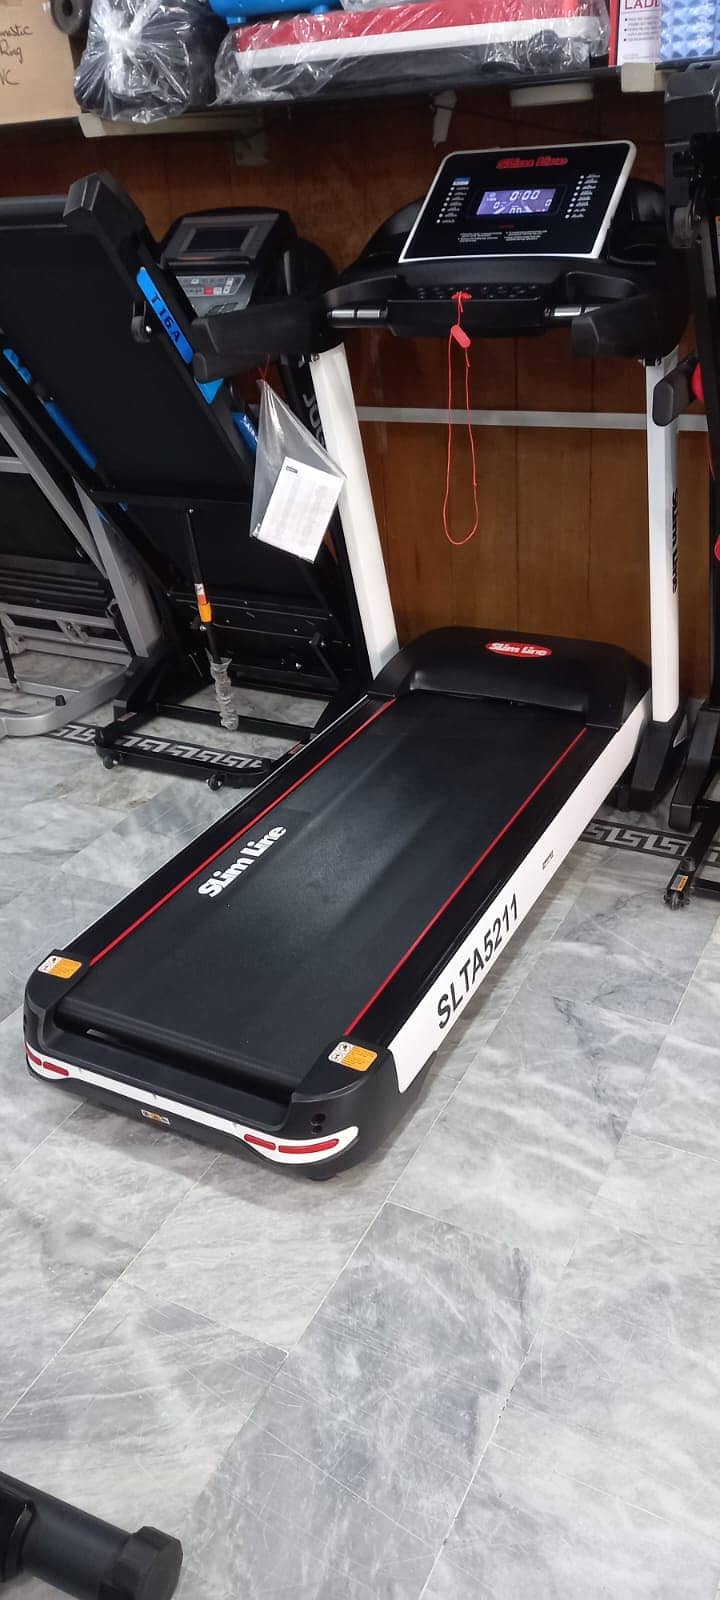 Treadmill Domestic Home Use Brand New Box_Pack avavilable 12